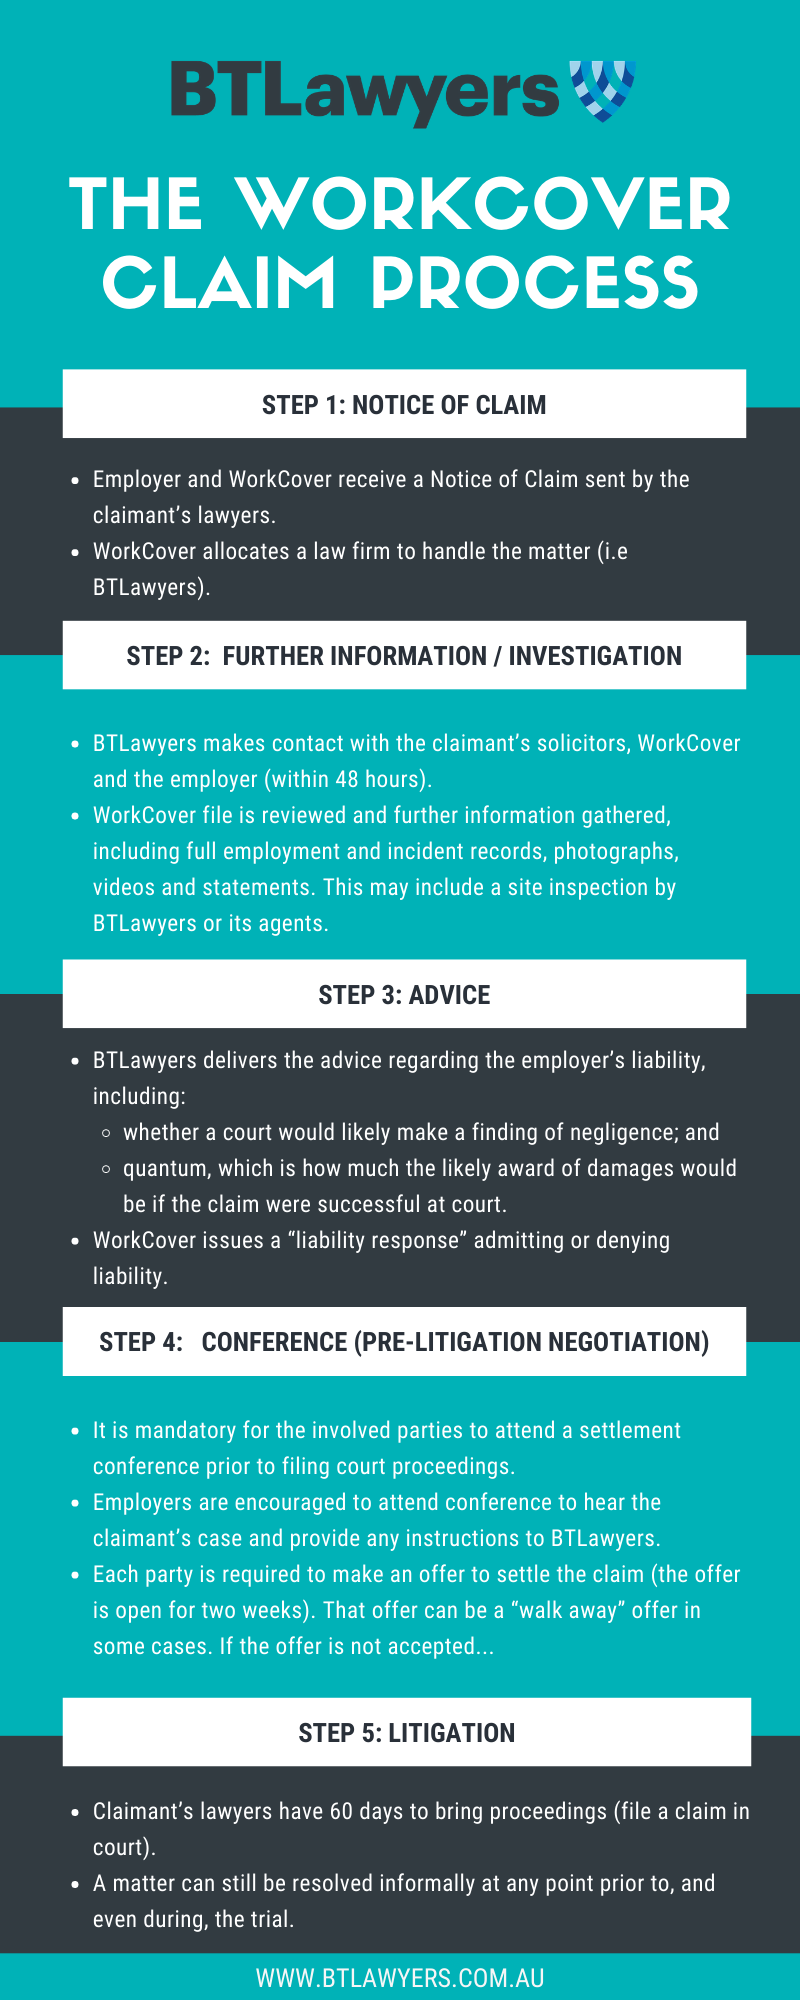 BTLawyers - Workcover Claim Process - Infographic